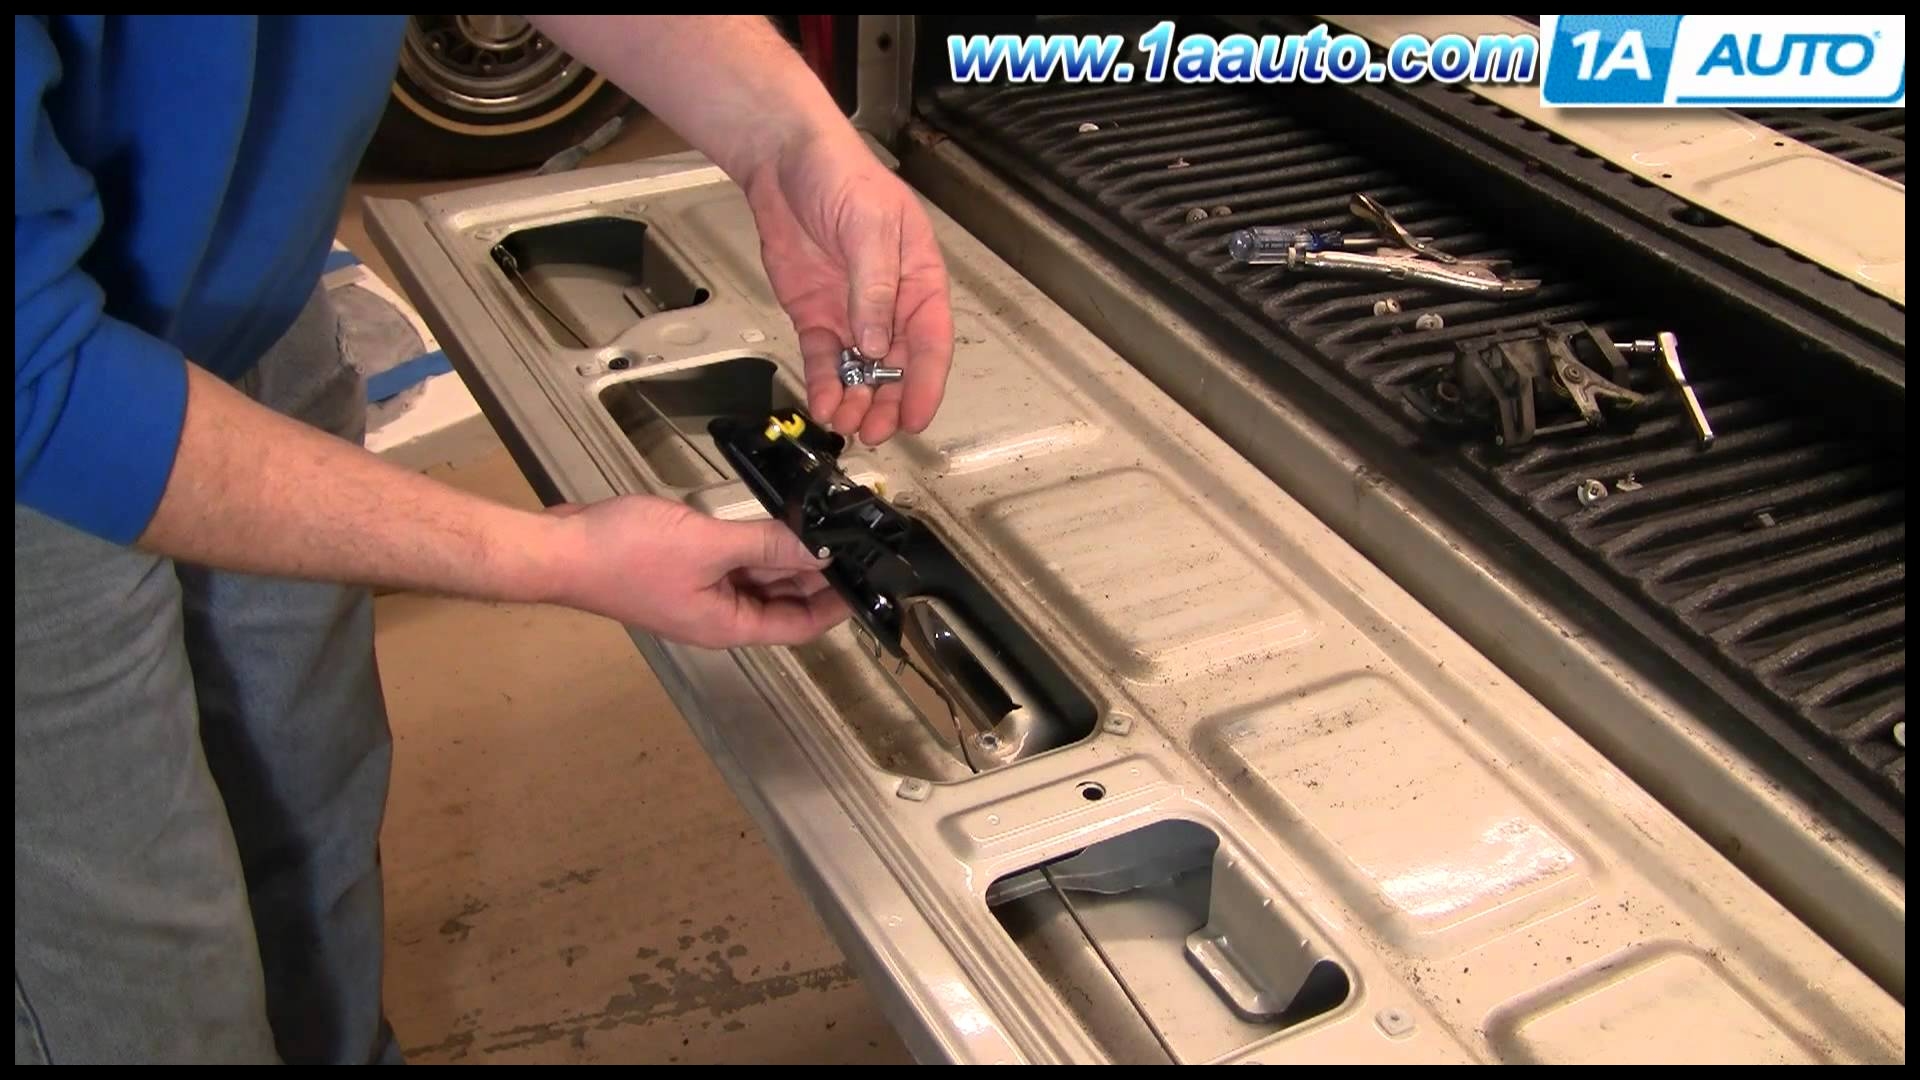 How to Install Replace Broken Tailgate Handle Toyota Ta a 95 04 1AAuto